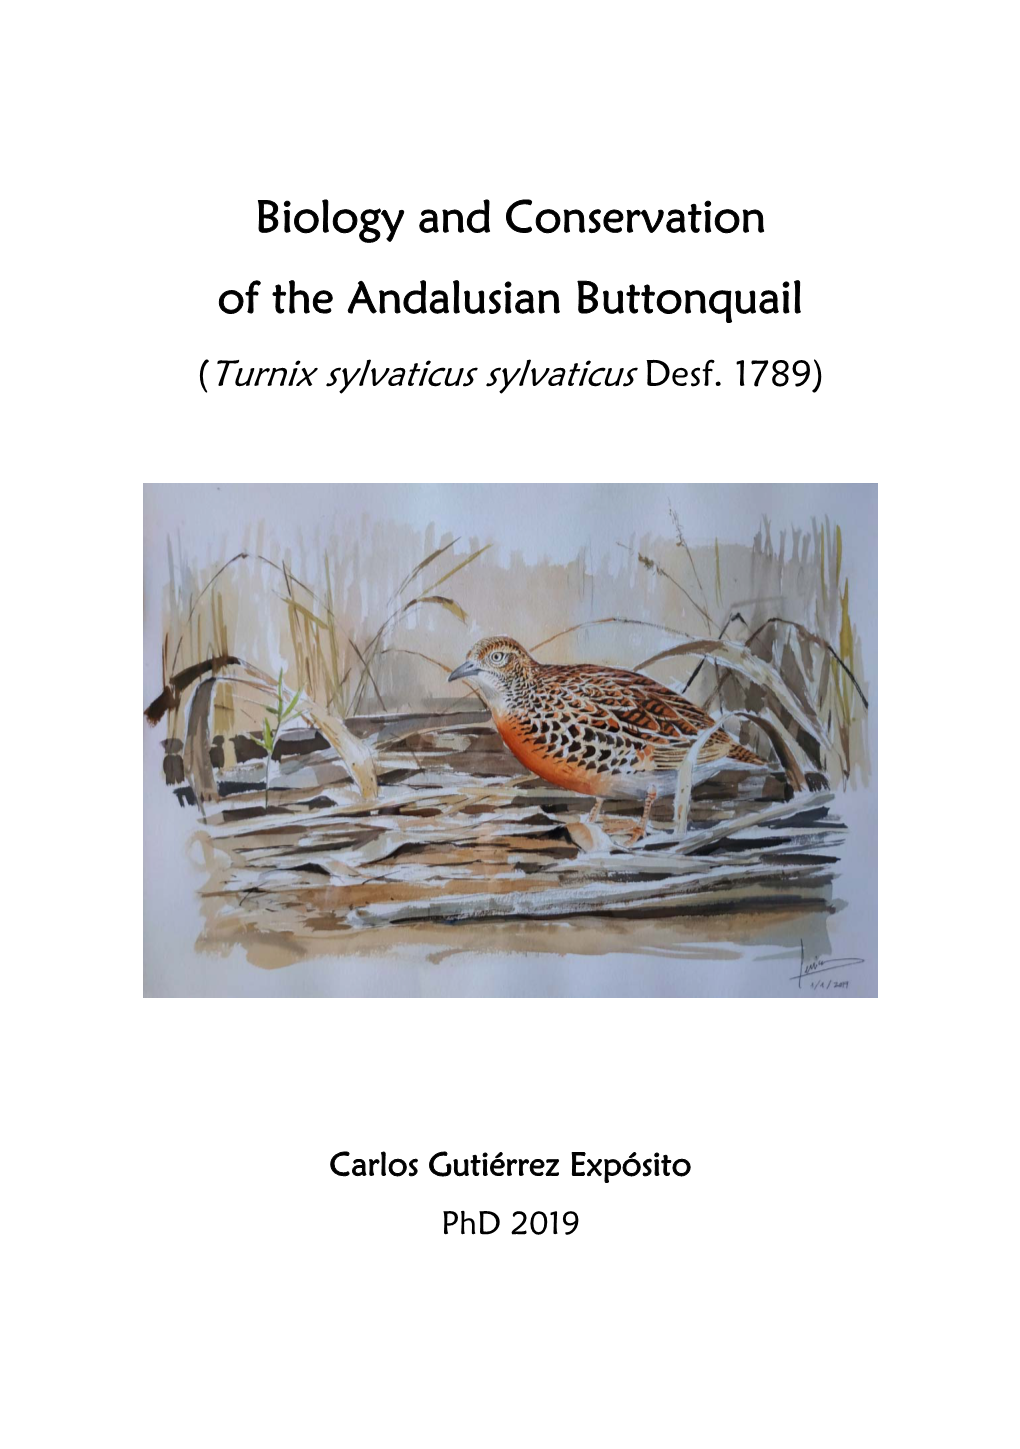 Biology and Conservation of the Andalusian Buttonquail (Turnix Sylvaticus Sylvaticus Desf